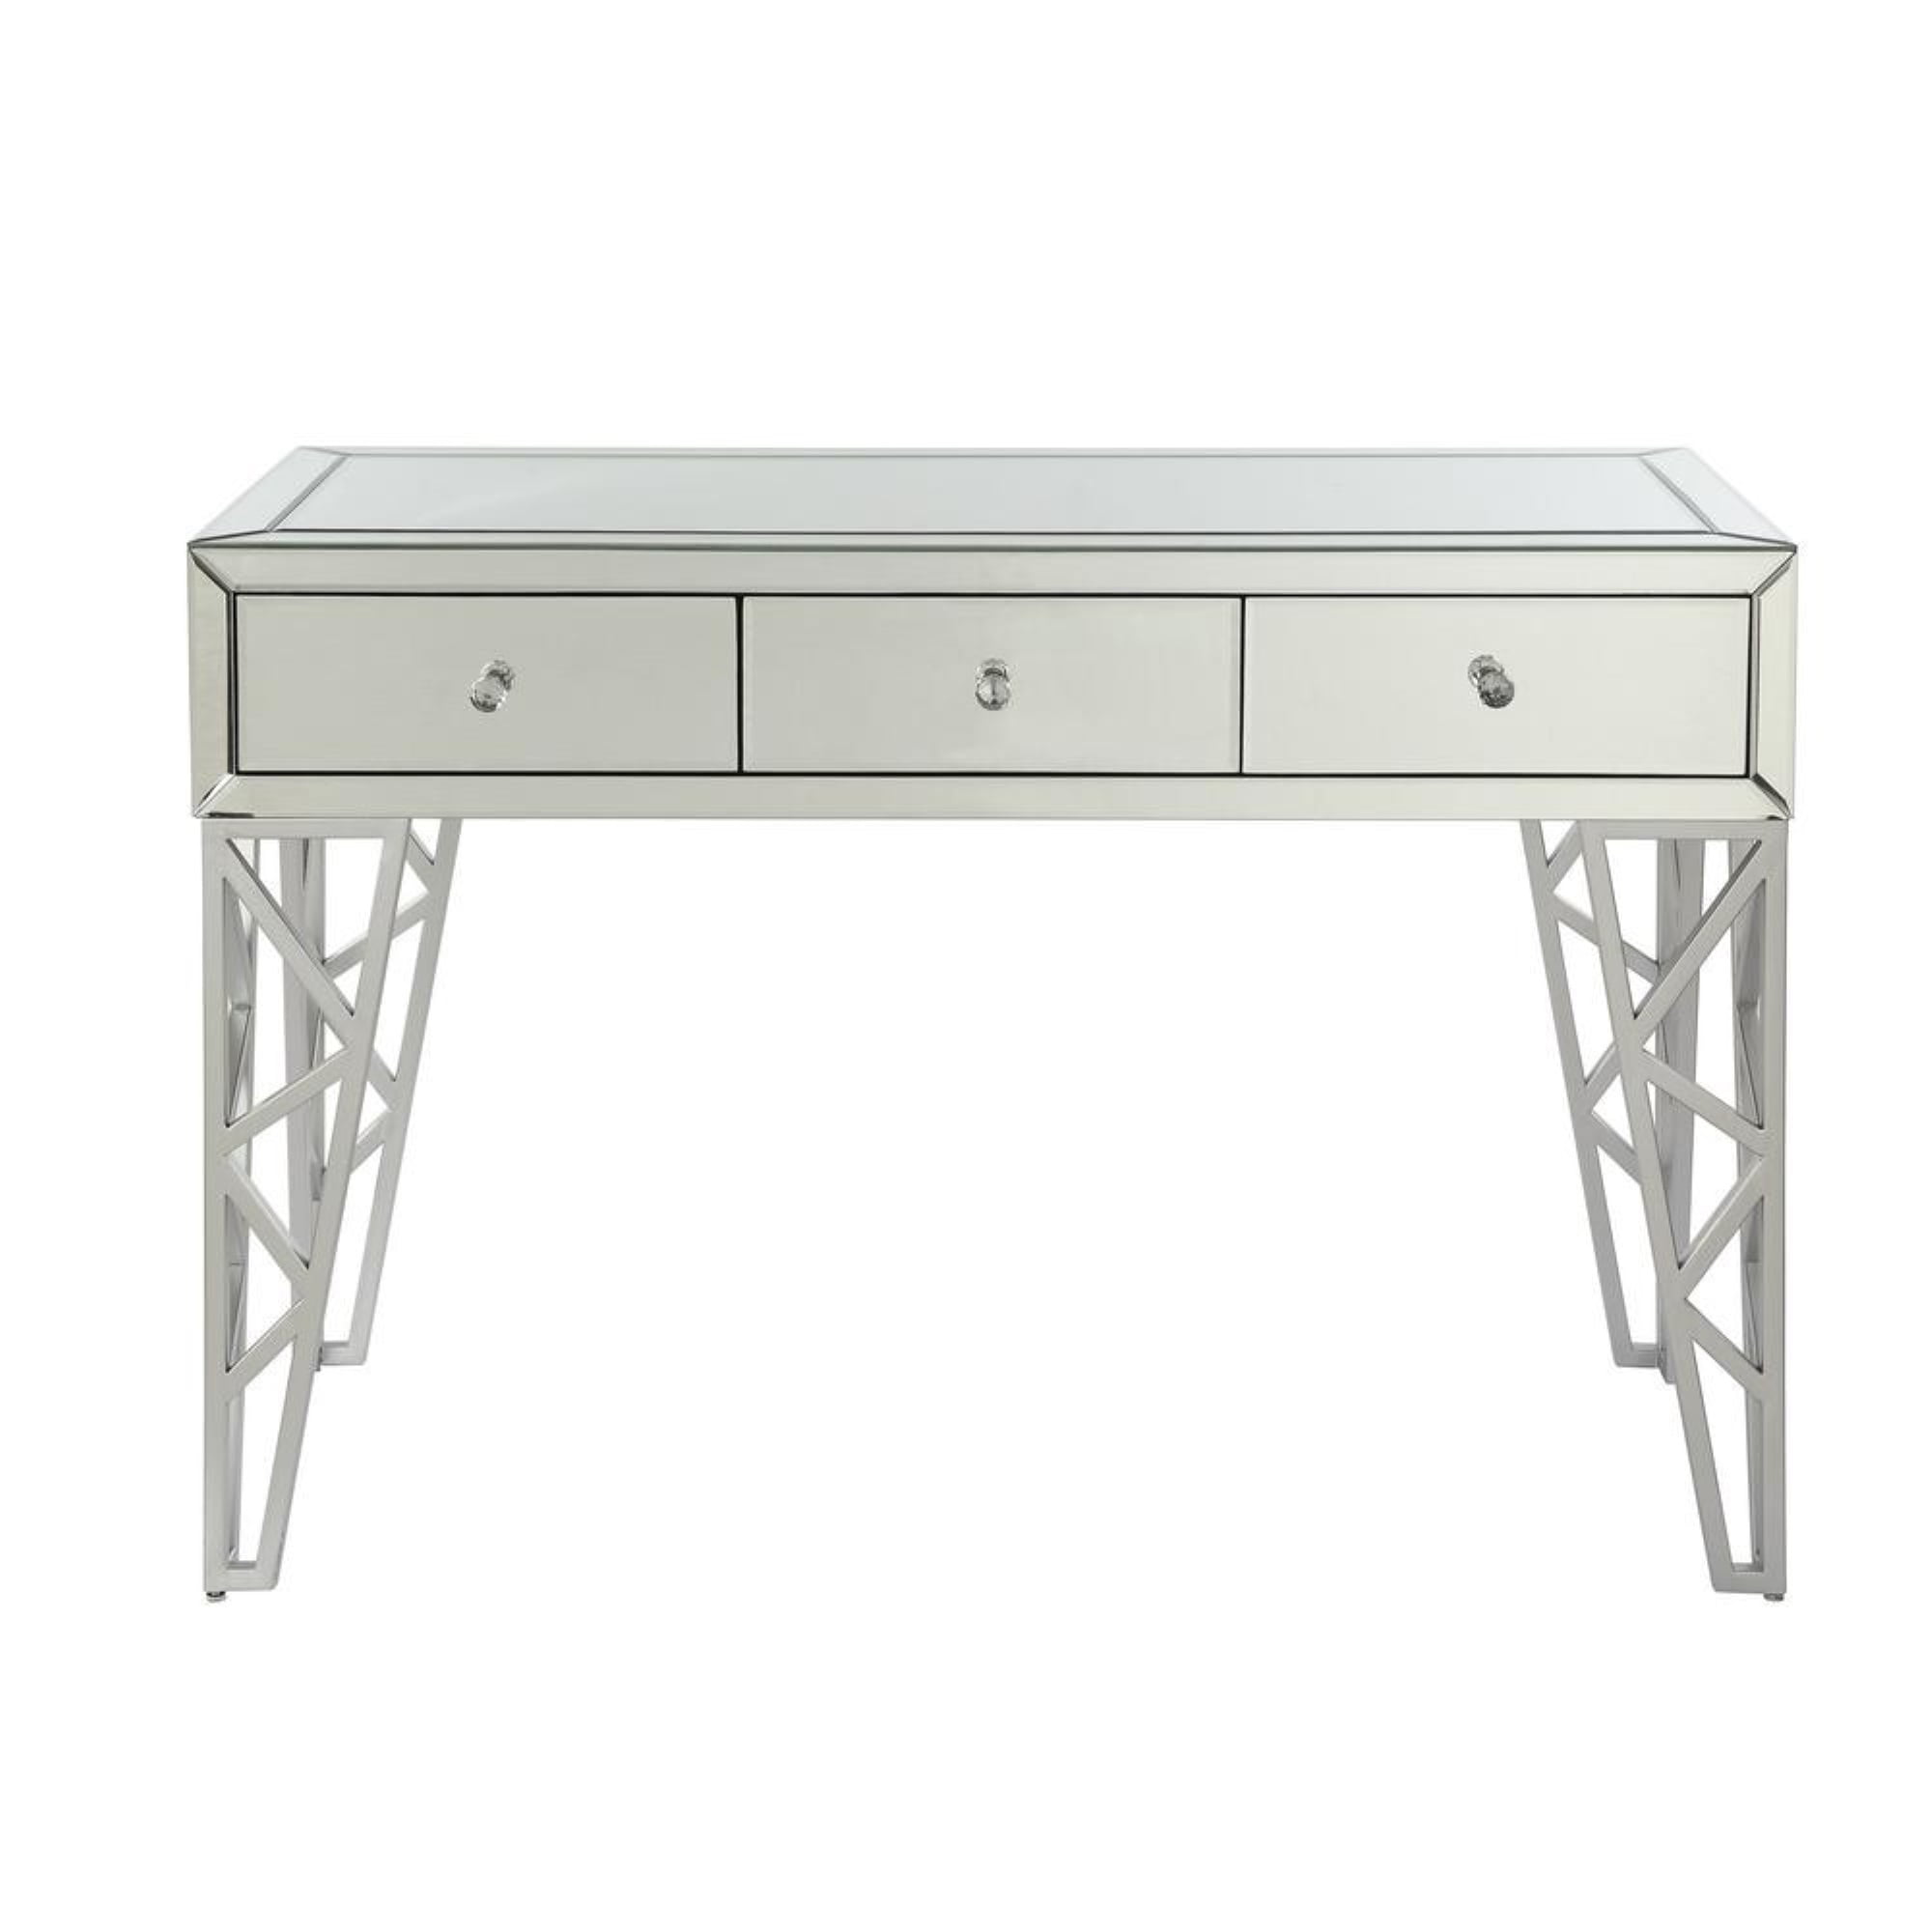 Rectangular Three Drawer Console Table With Geometric Cut